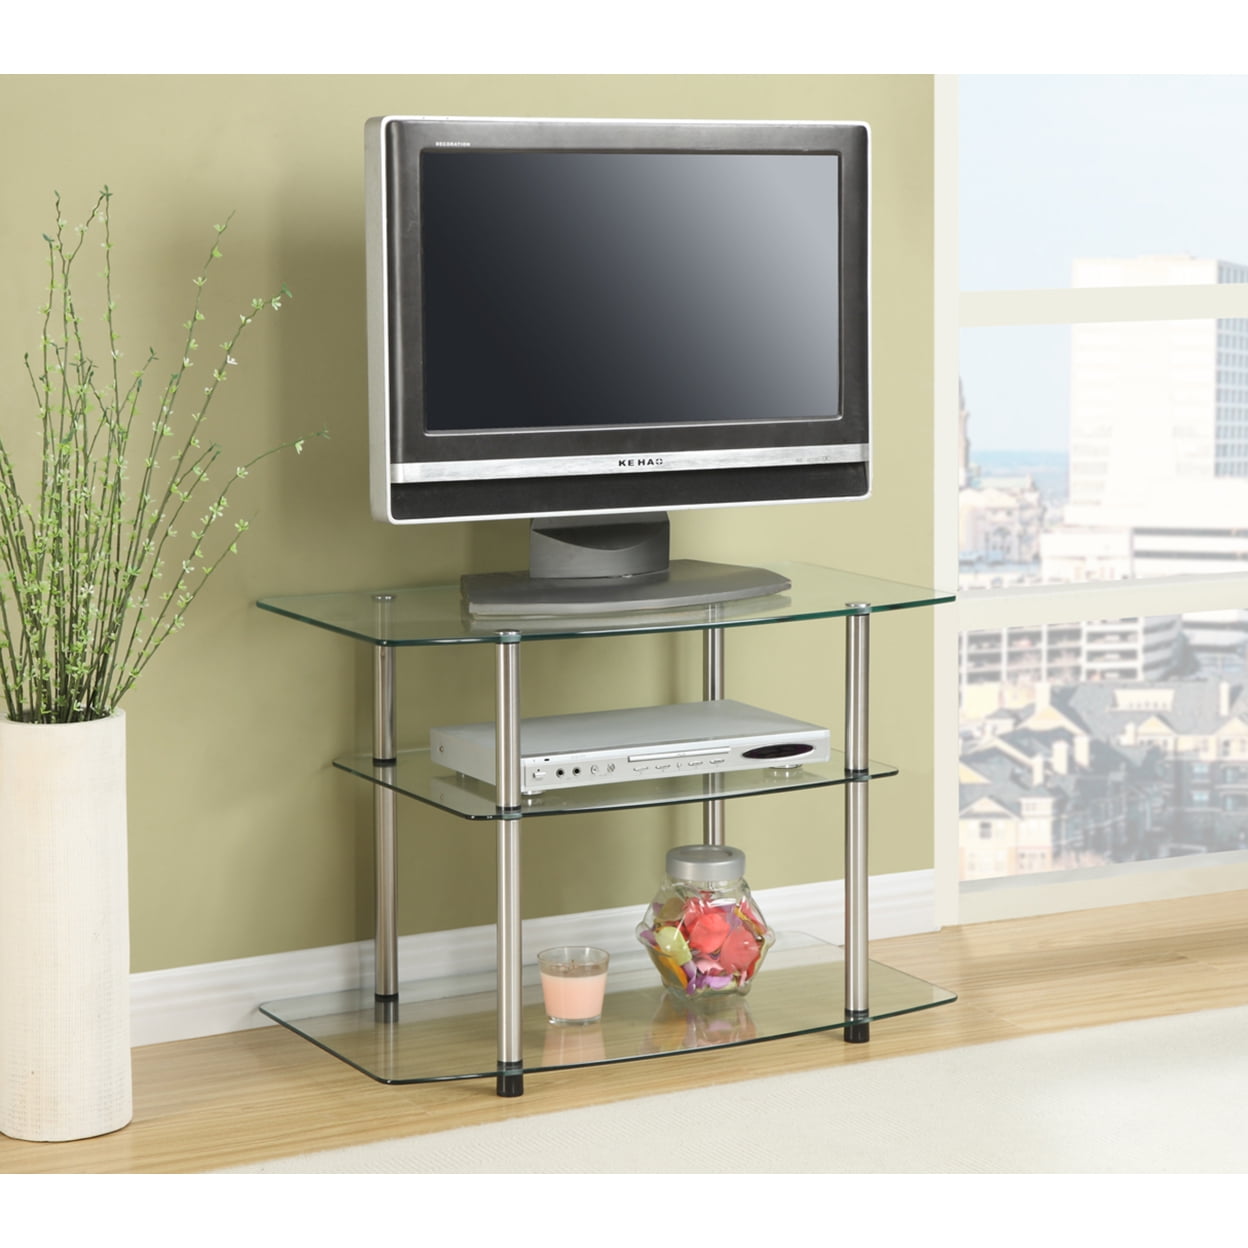 Designs2Go Classic Glass TV Stand - image 1 of 4